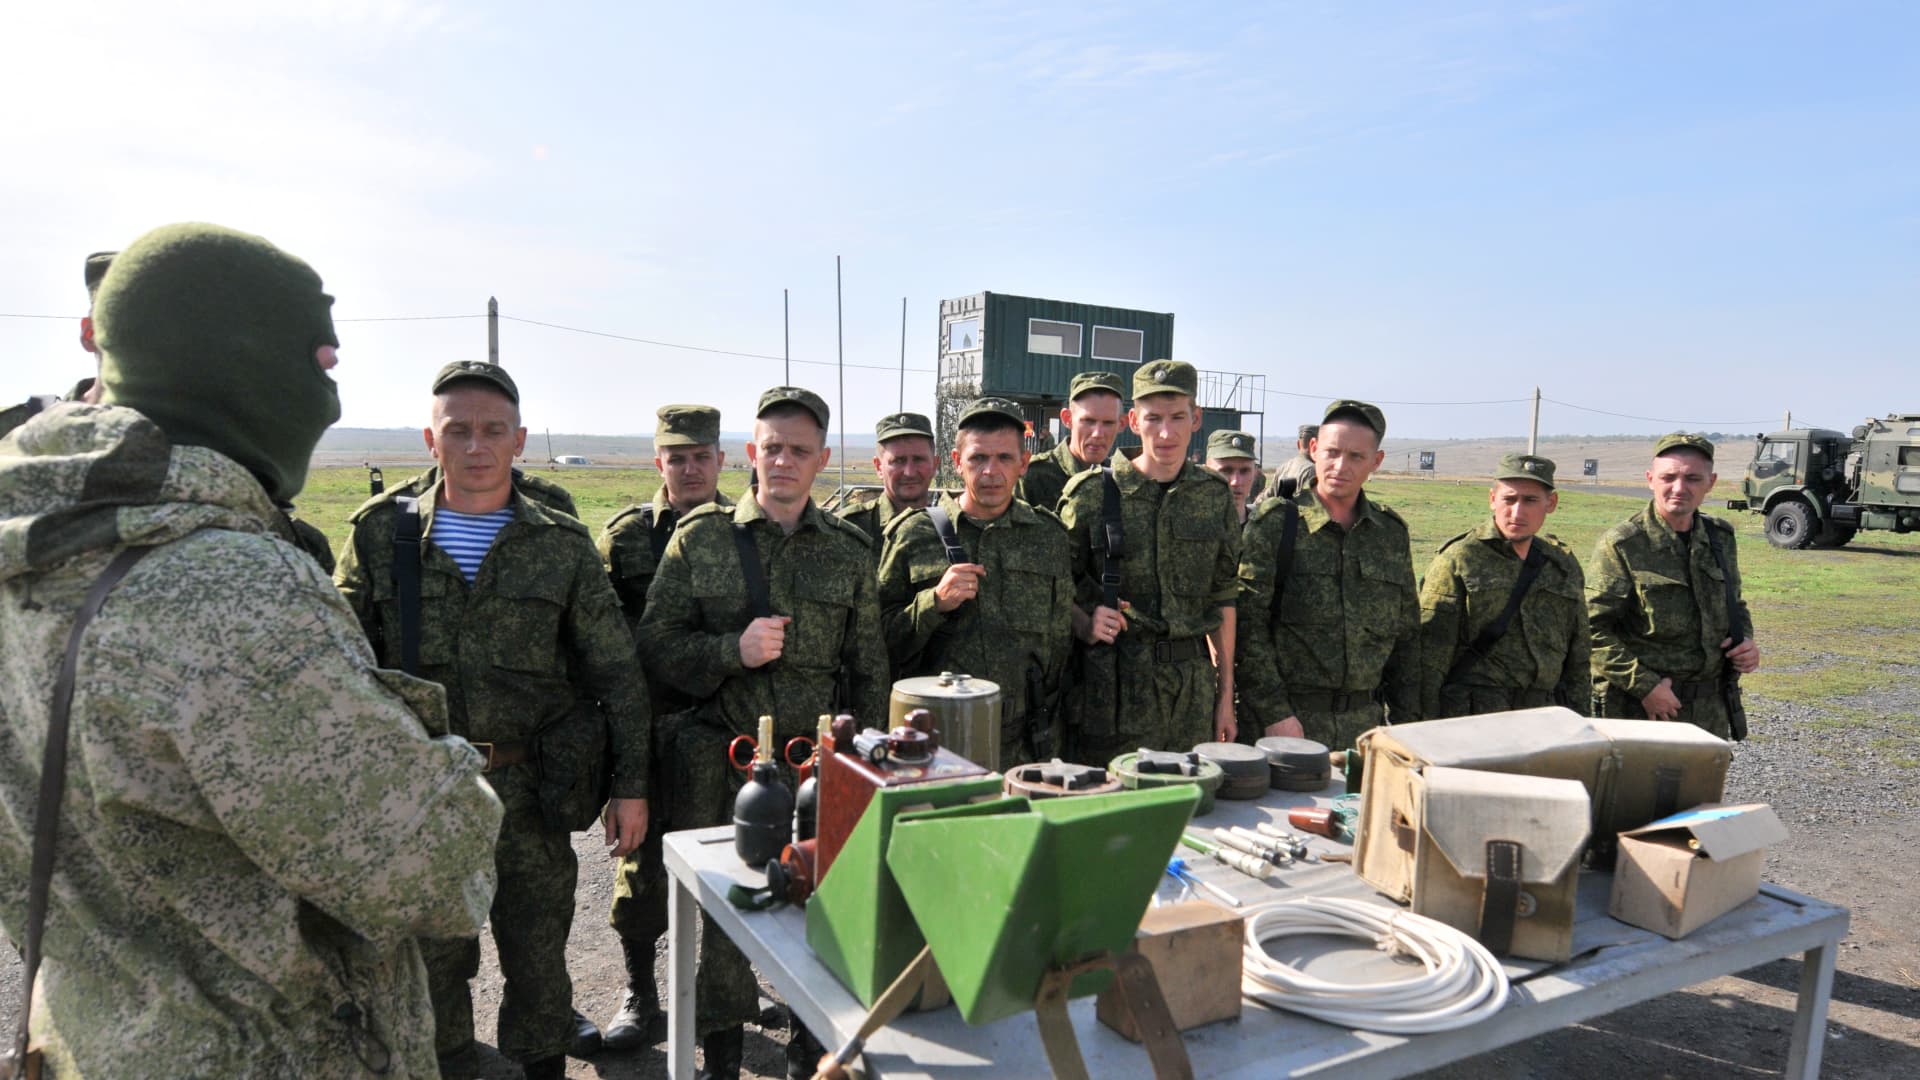 Russian citizens drafted during the partial mobilization begin their military trainings after a military call-up for the Russia-Ukraine war in Rostov, Russia on October 02, 2022.